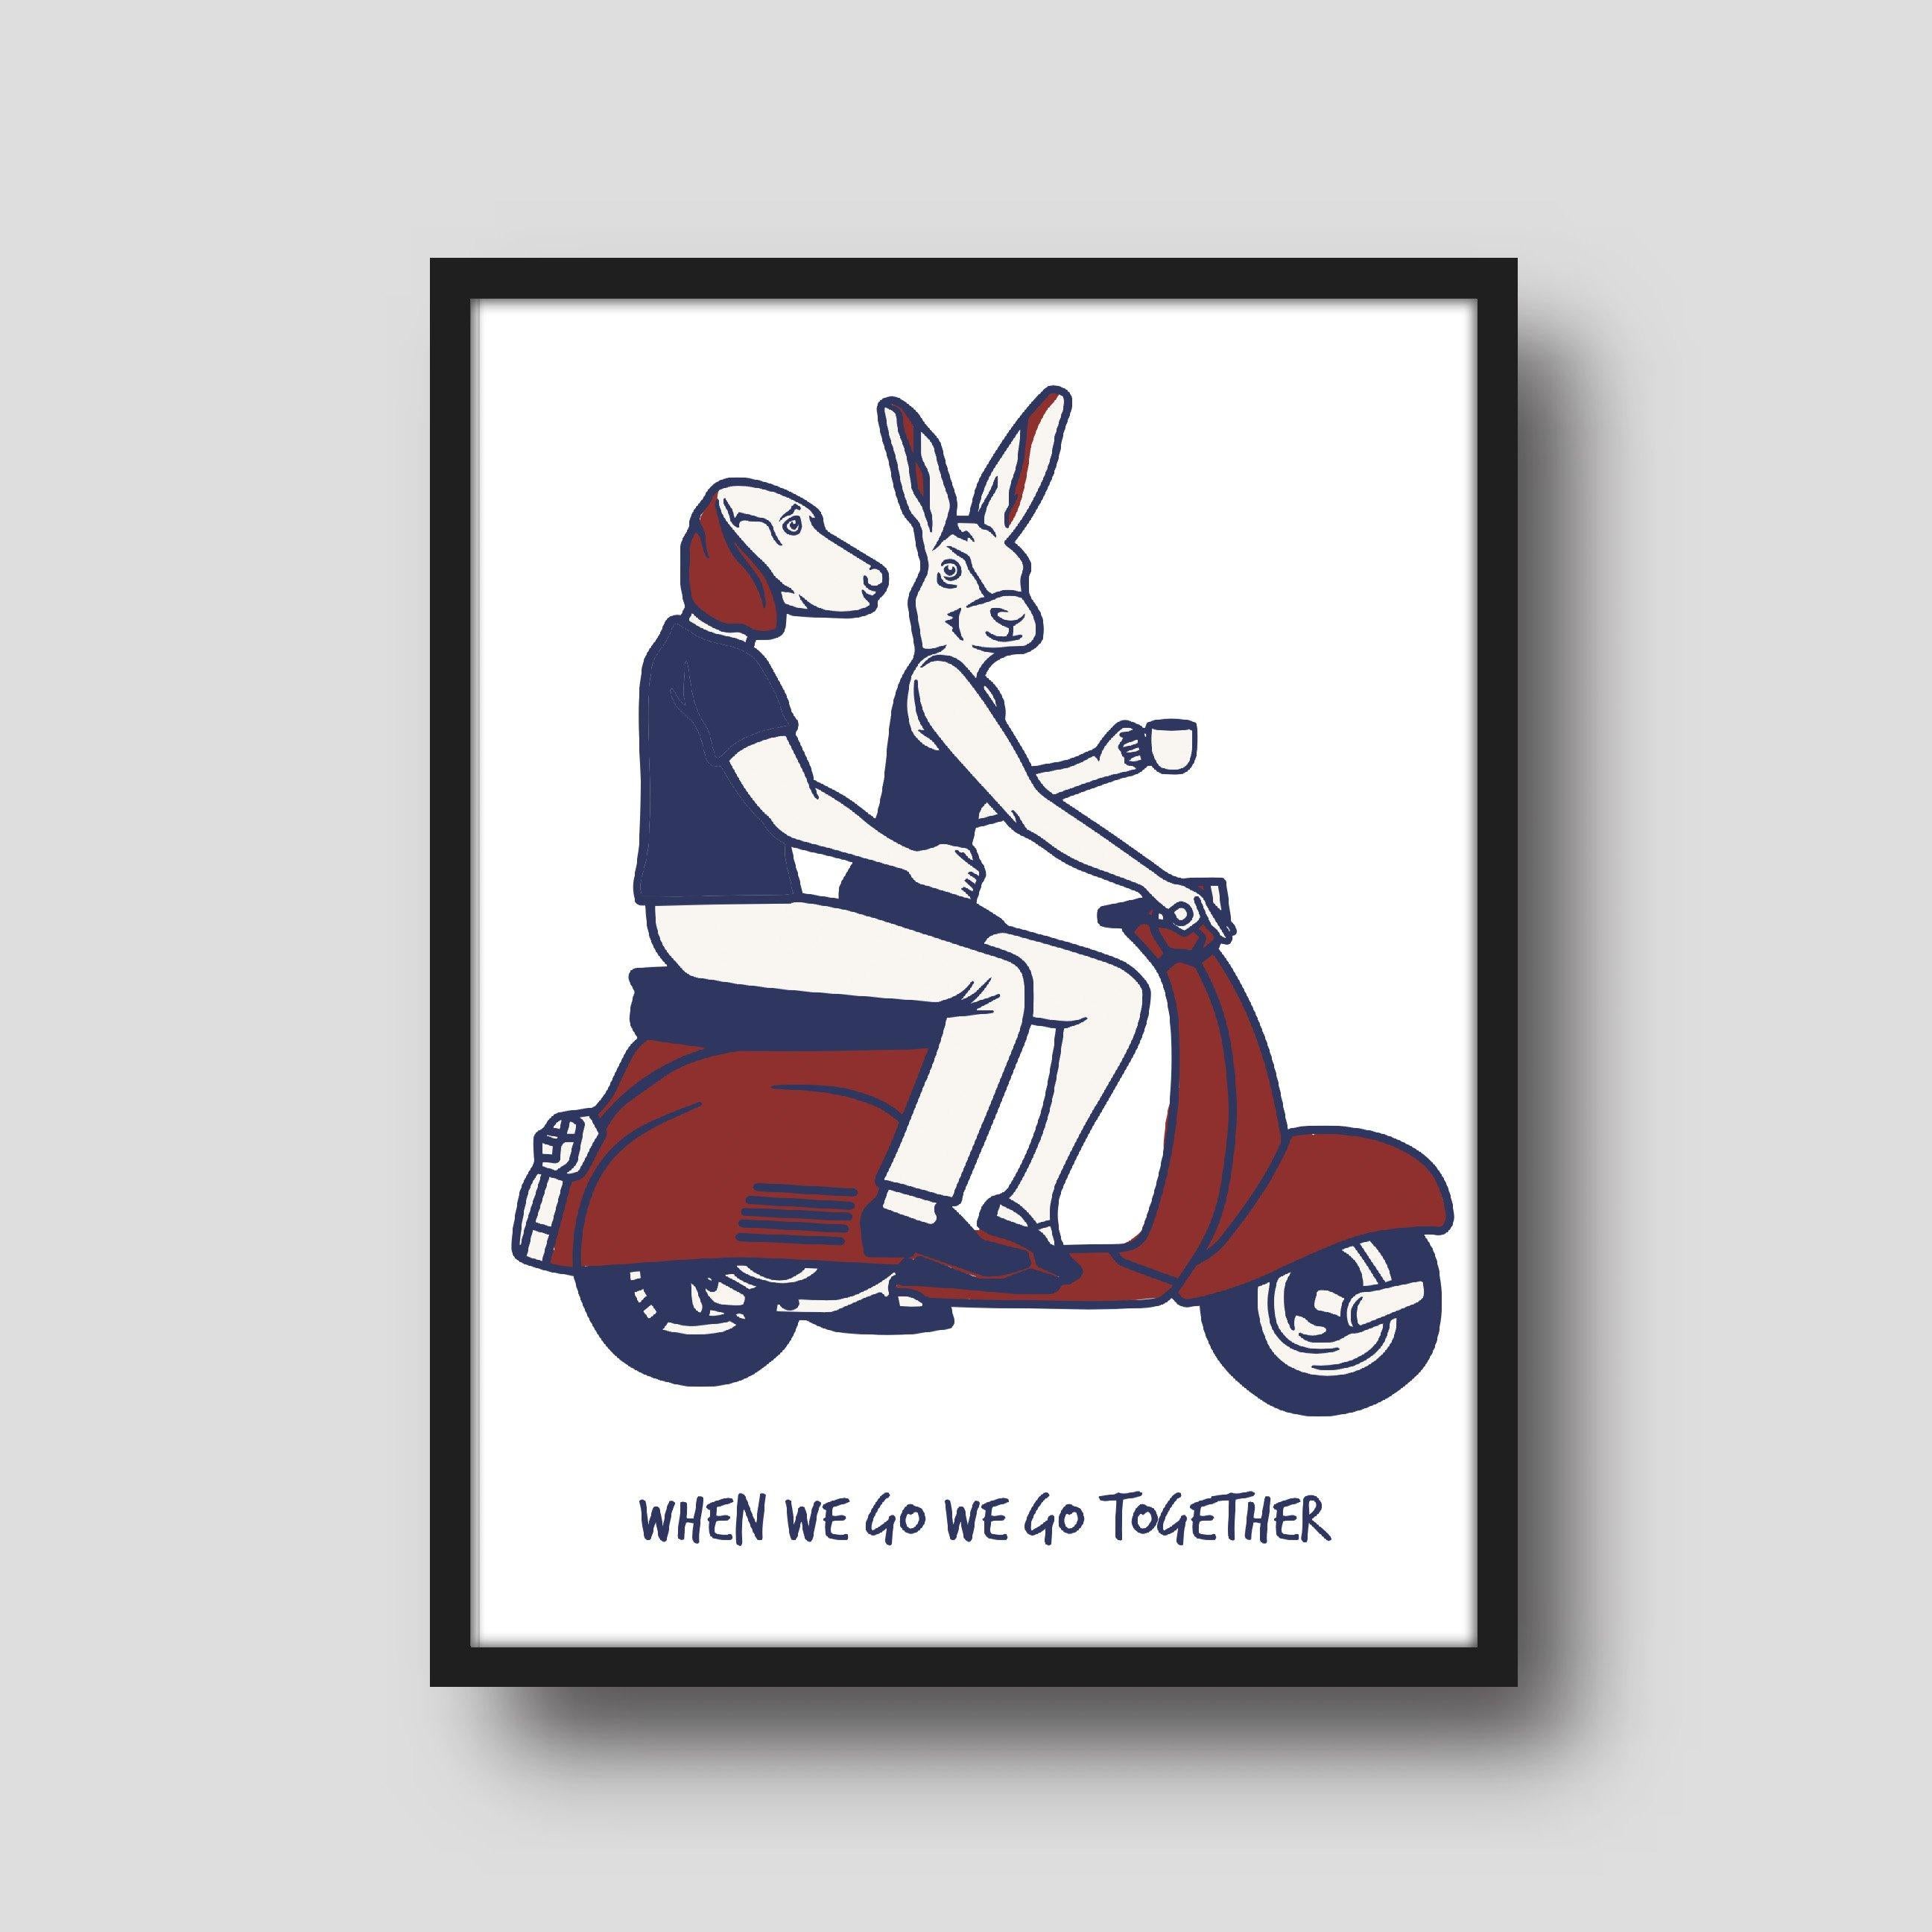 Print - Gillie and Marc - Art - Limited Edition - Love - Vespa - Adventure